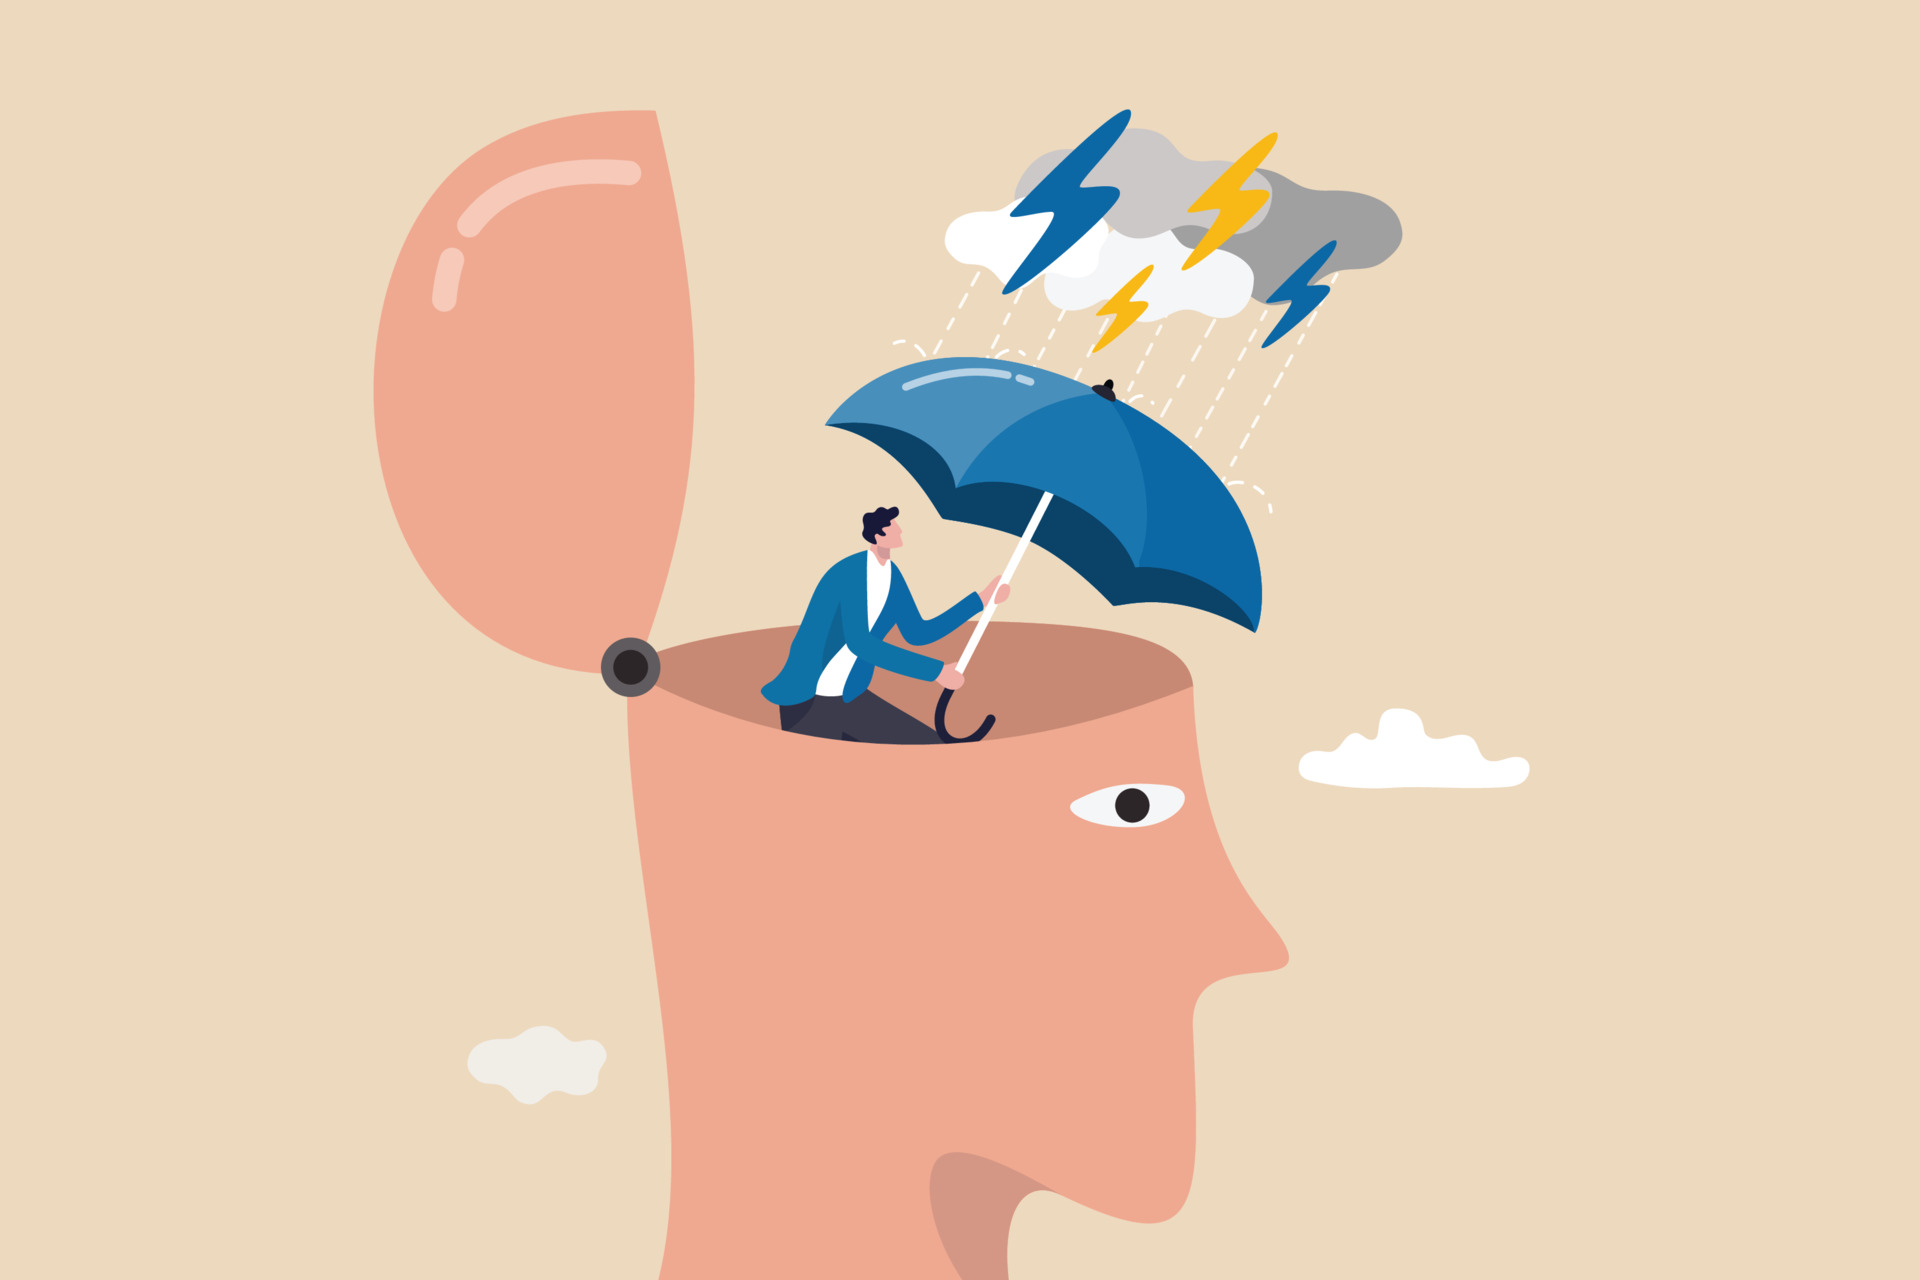 Mental health protection, depression or anxiety control or cure, help, support mental illness suffering concept, human head with his self using umbrella to protect from heavy raining storm depression. 3595293 Vector Art